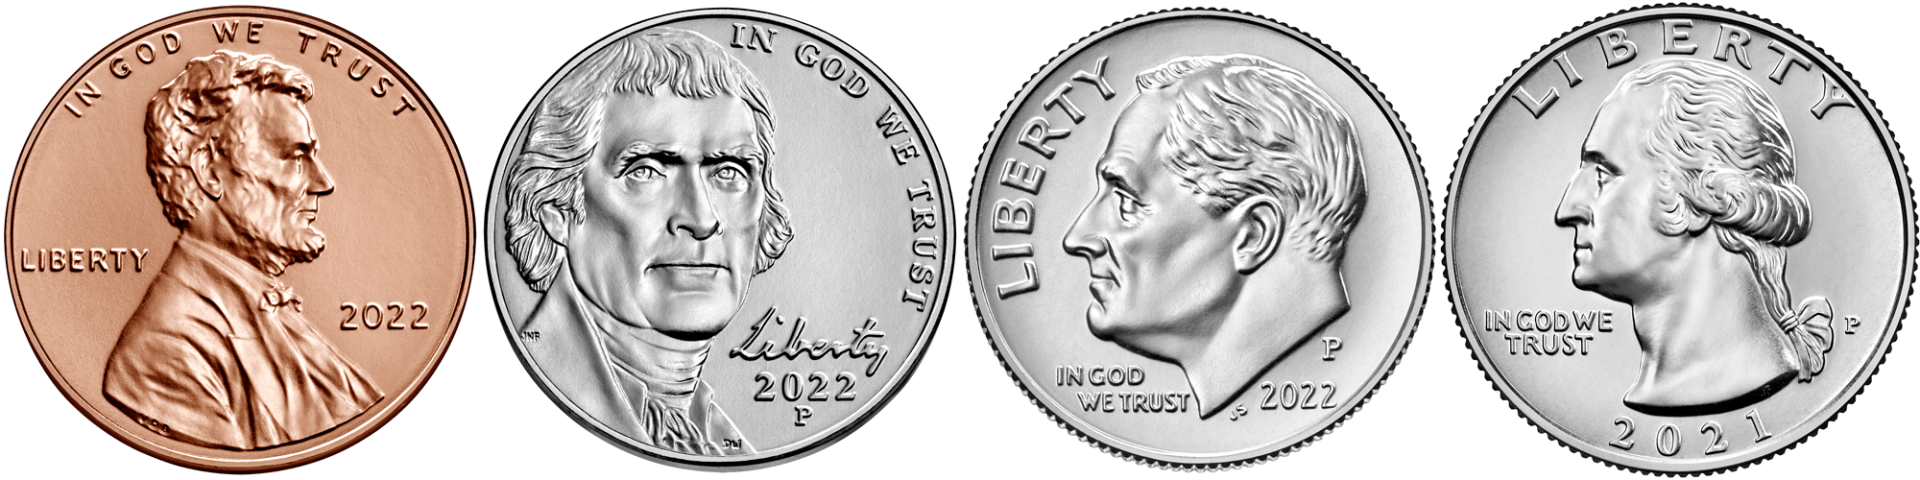 Obverses of the 4 Main Types of U.S. Coins